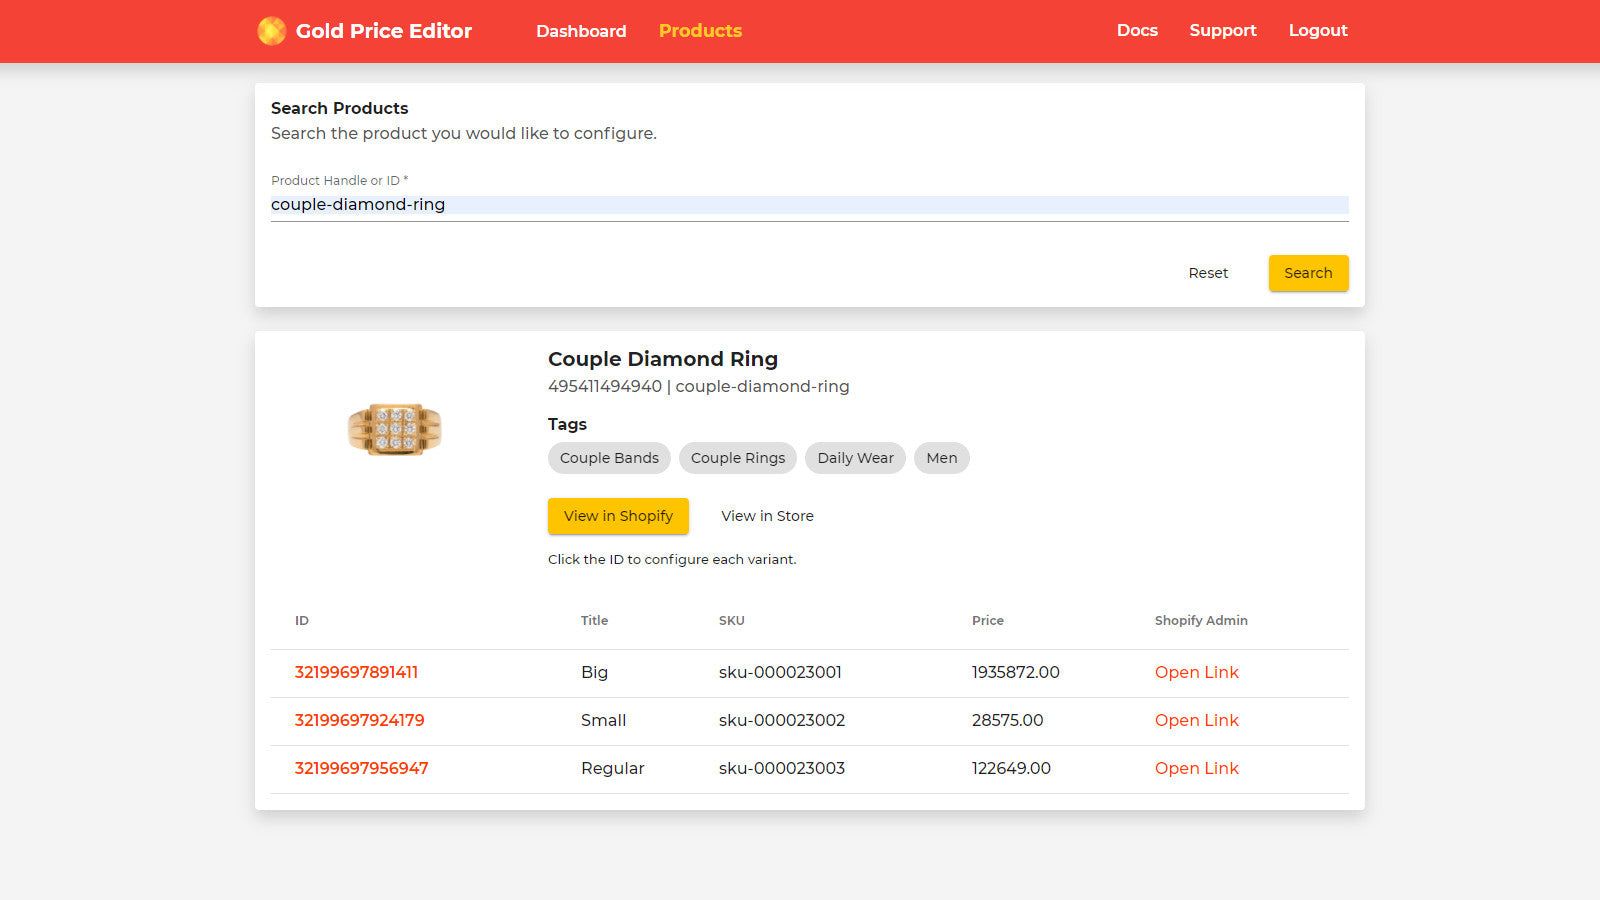 Live Gold Price Editor | Product Search